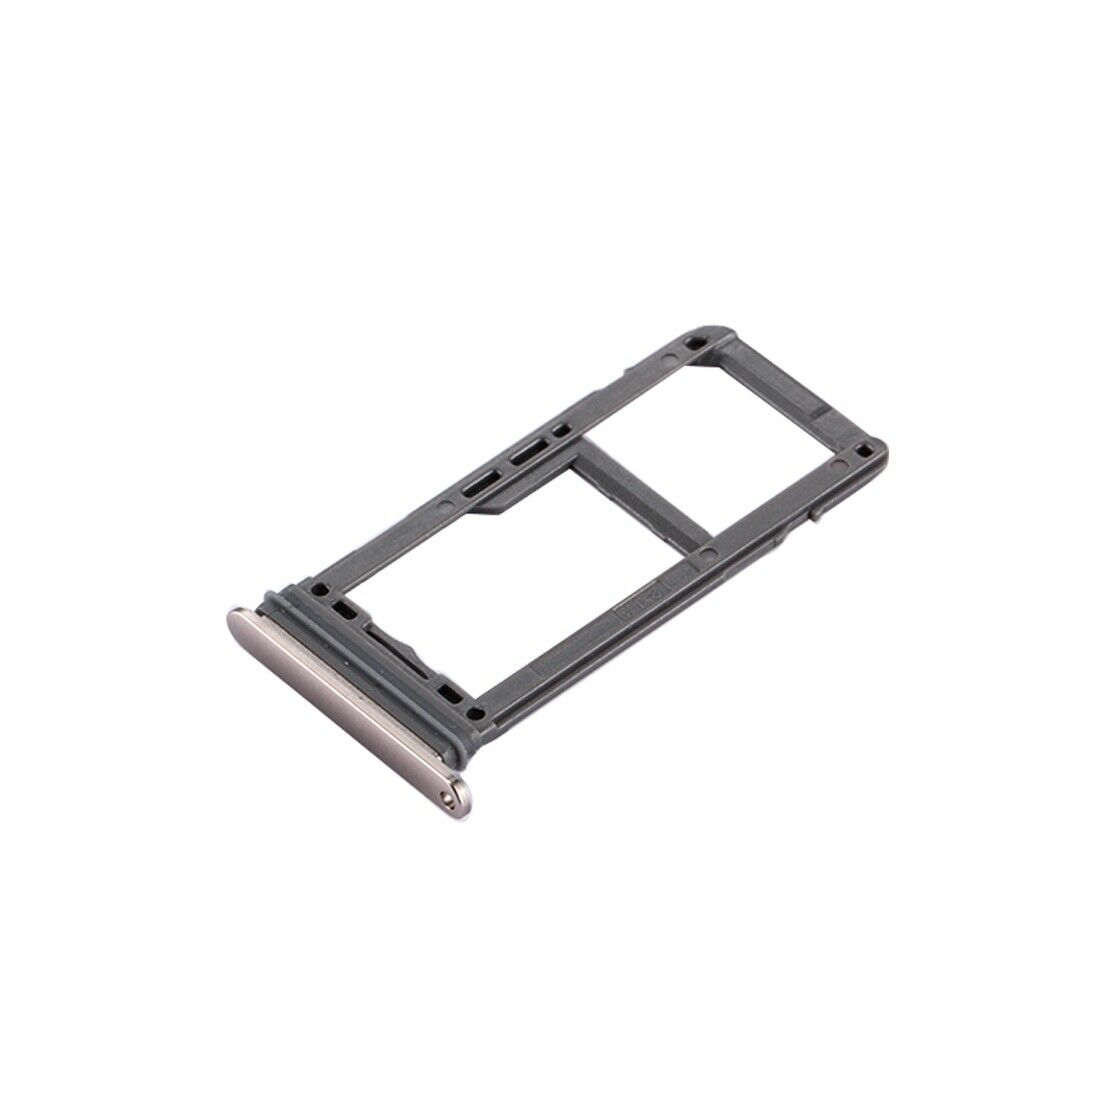 Samsung Galaxy S8 G950 / S8+ Plus G955 SIM & SD Card Tray Holder - Gold for [product_price] - First Help Tech